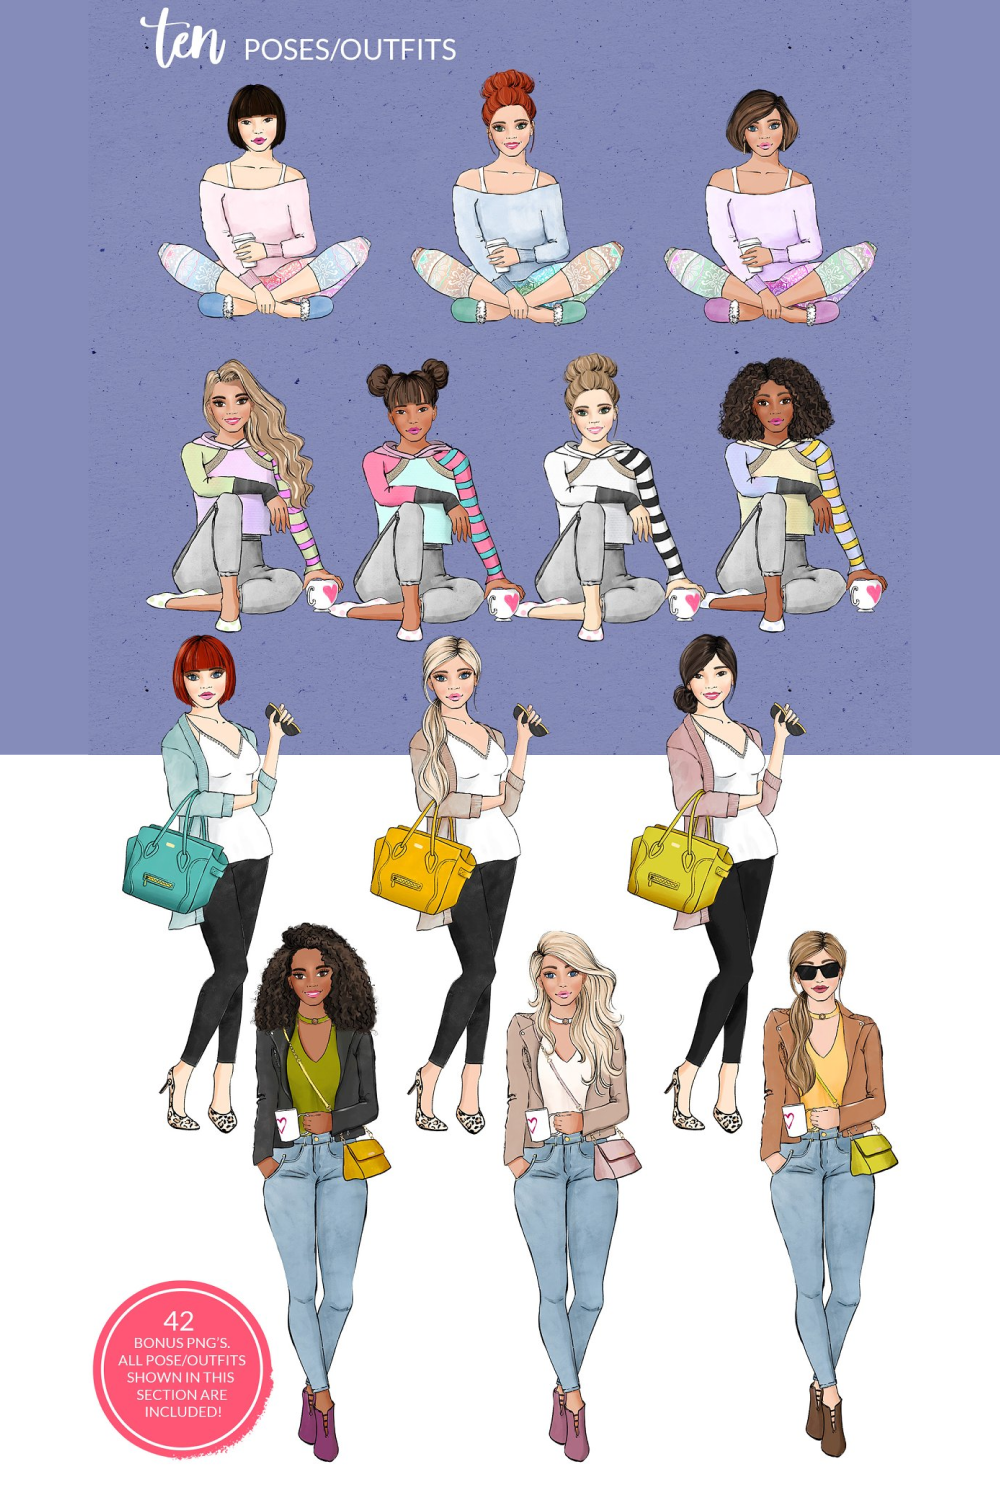 Different ladies with different hairstyles and skin tones.